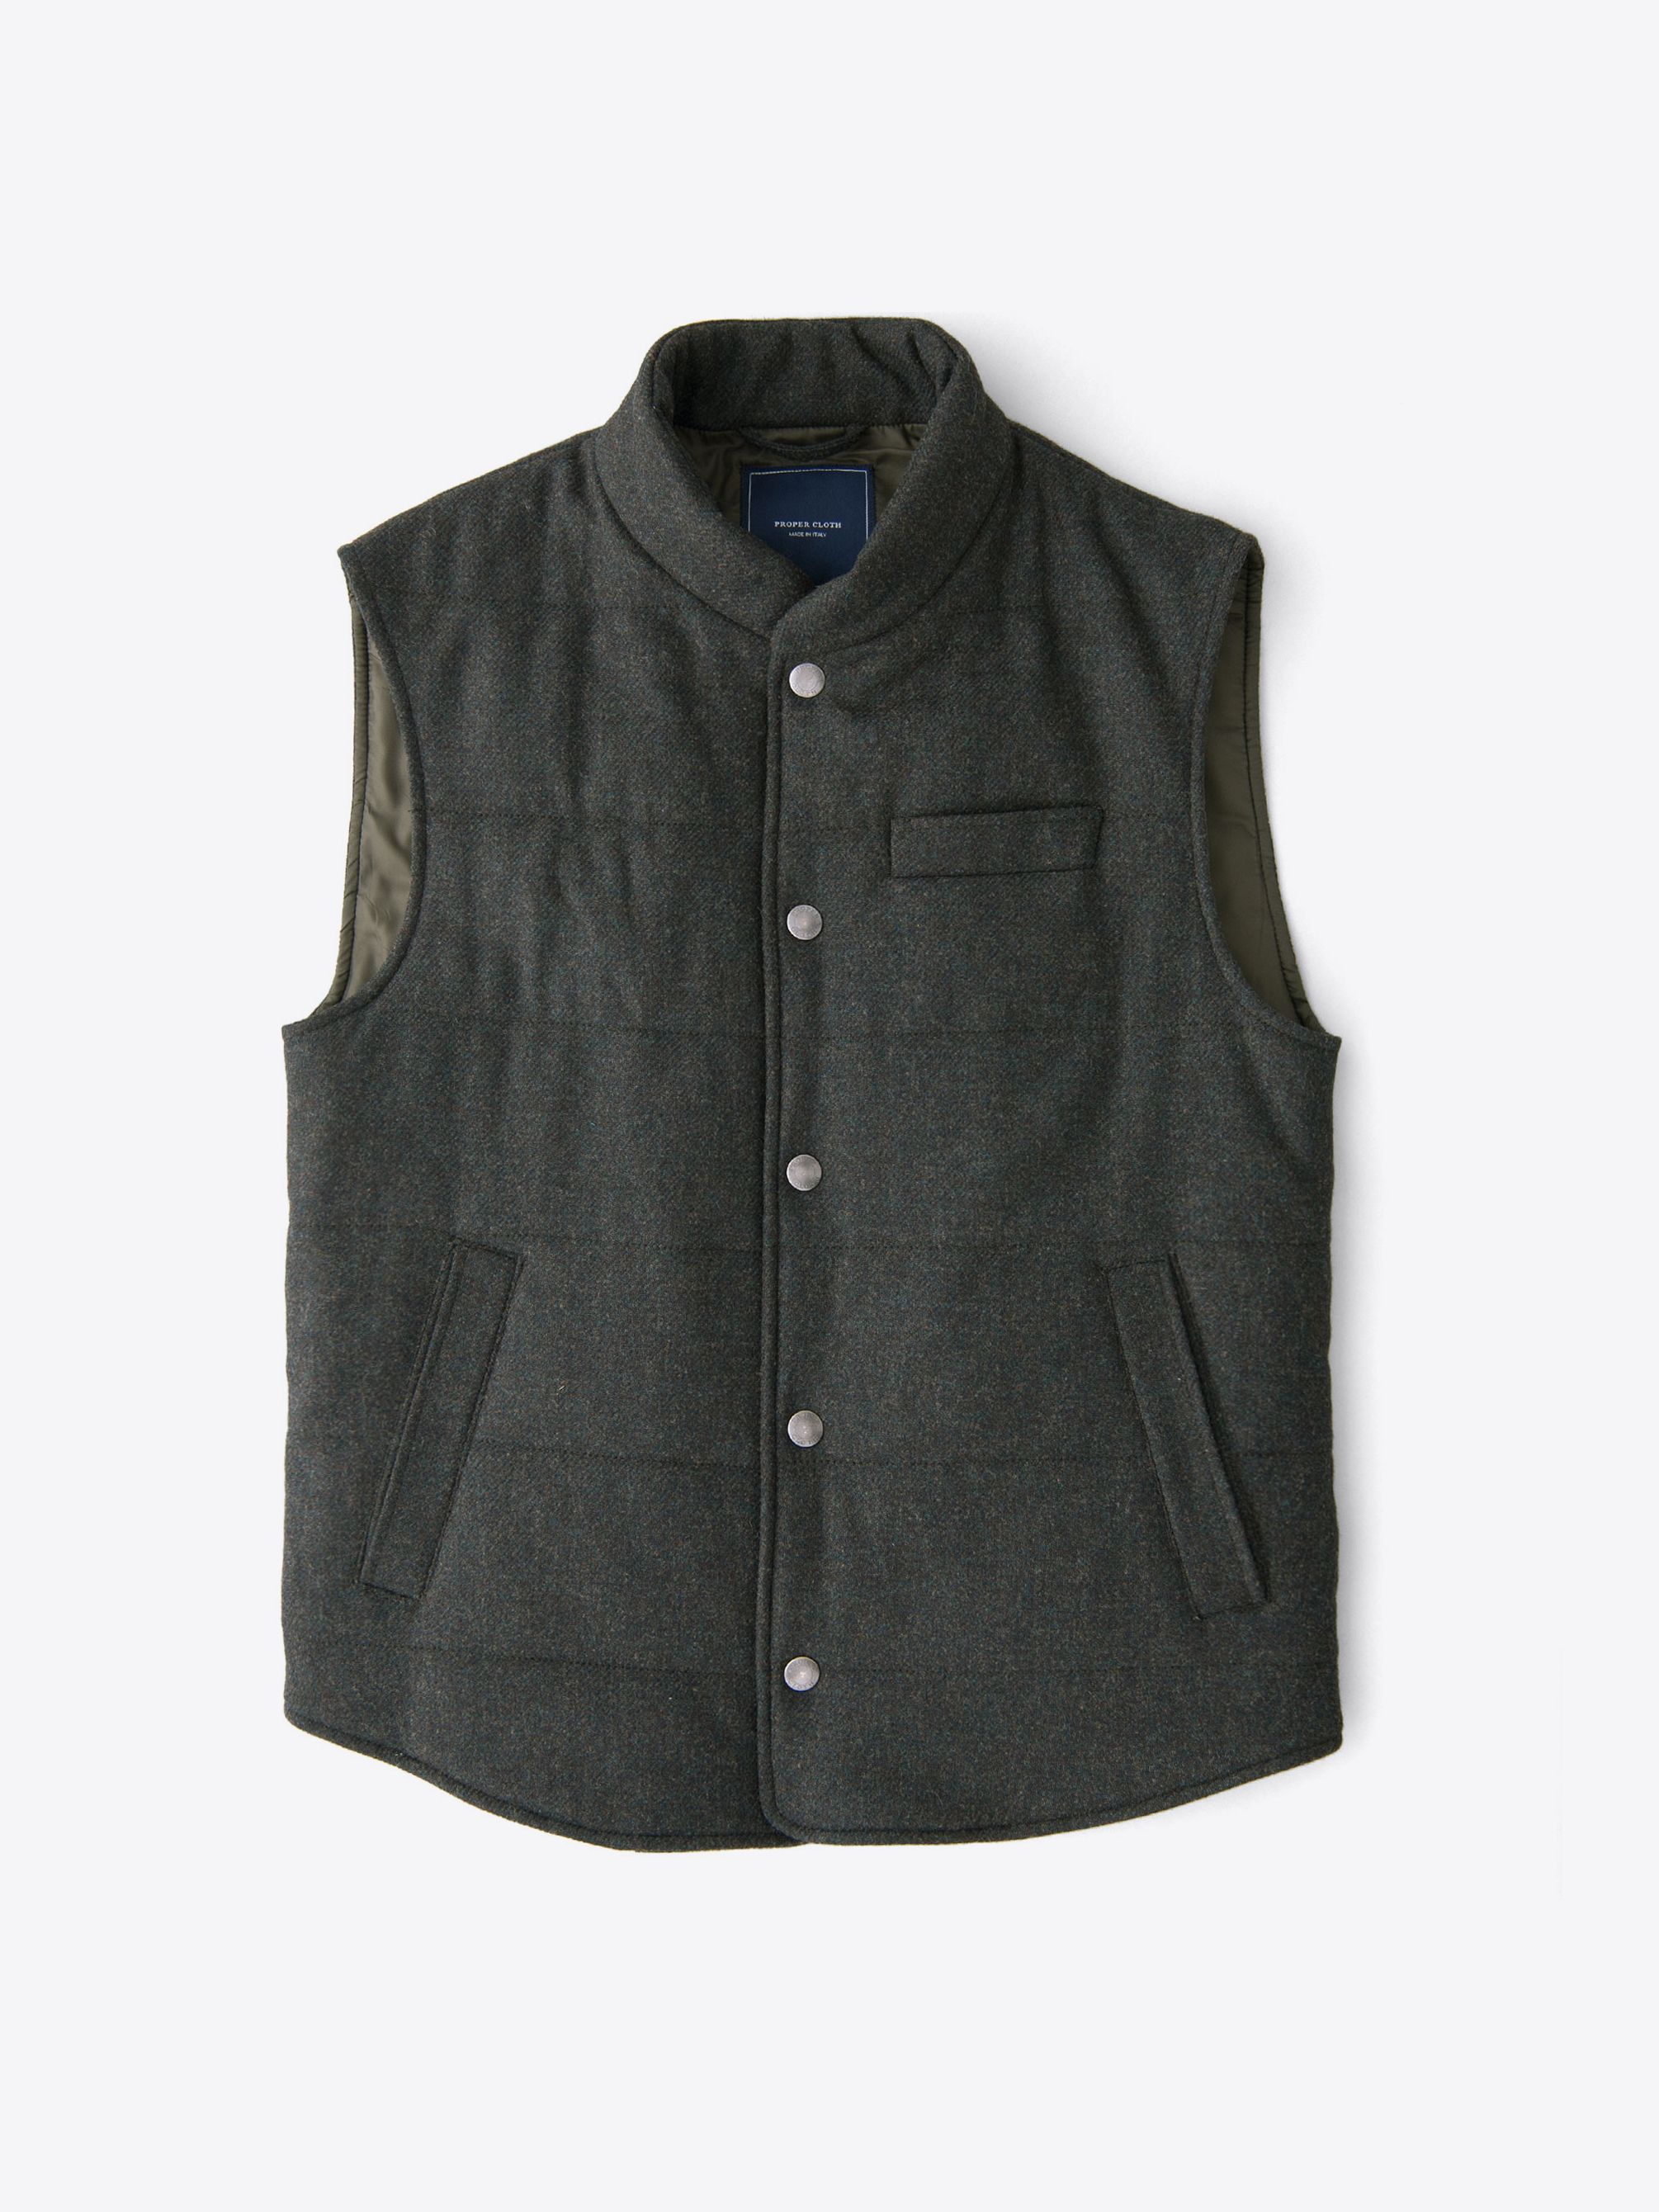 Zoom Image of Cortina I Forest Wool Cashmere Snap Vest